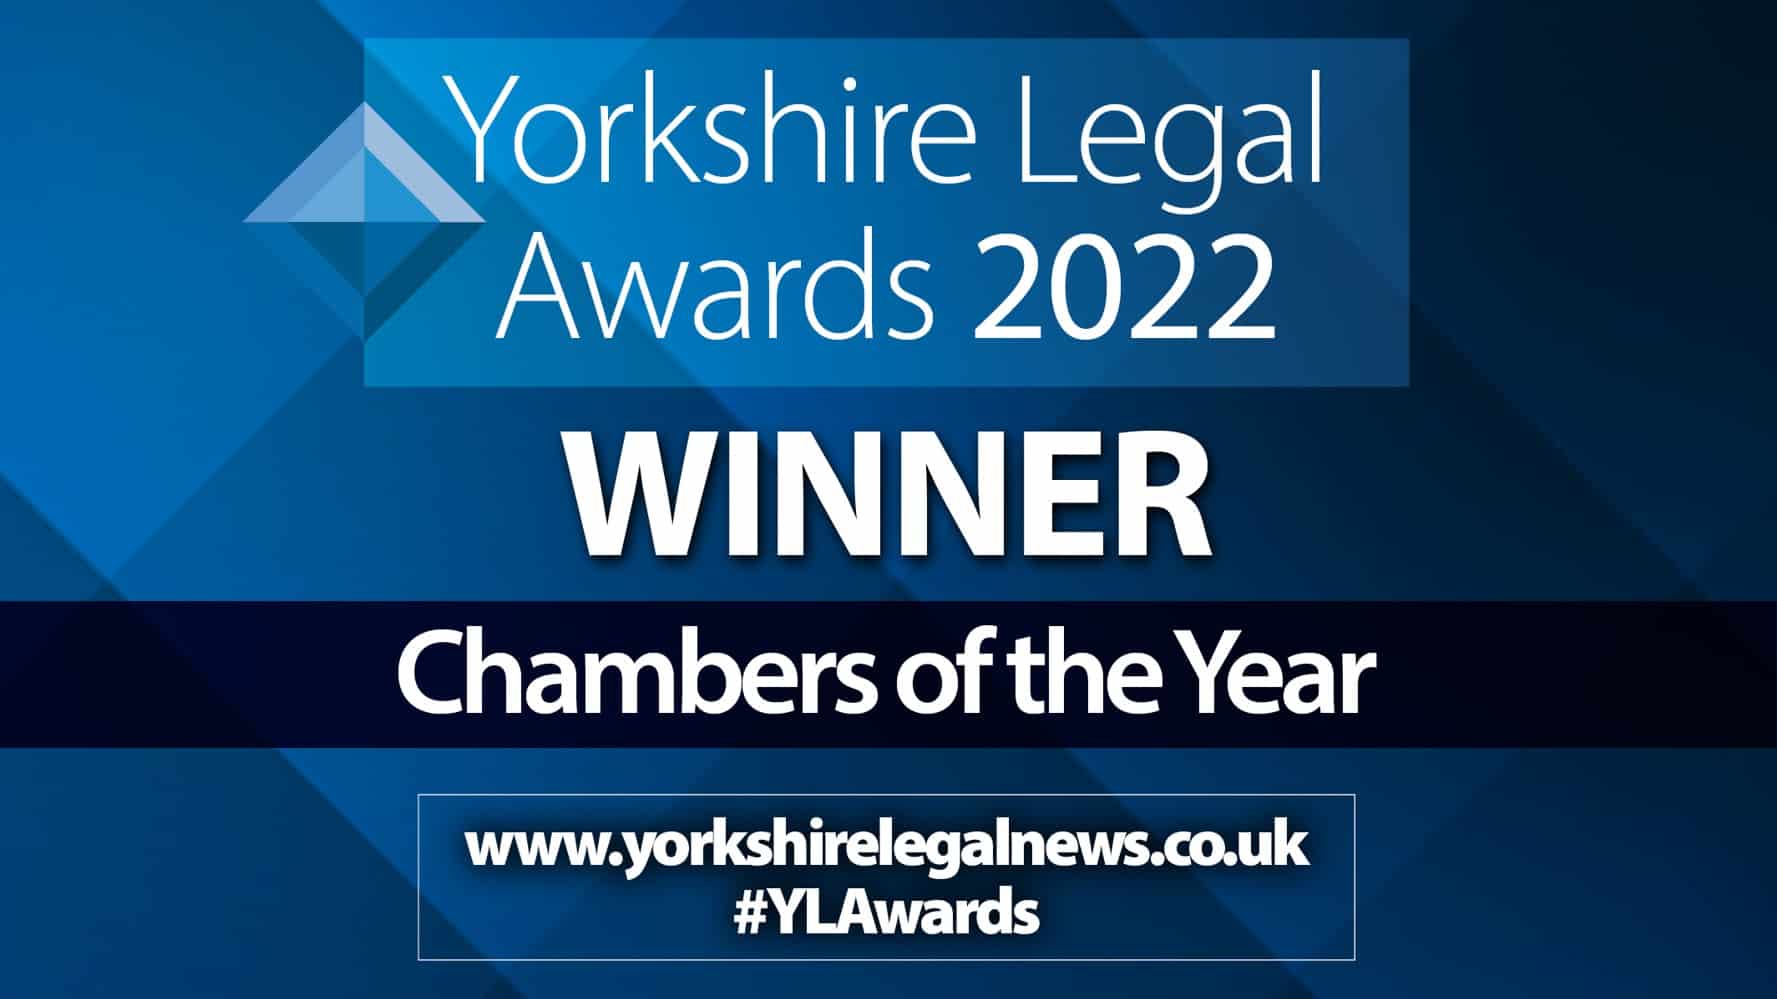 Parklane Plowden Chambers retains the ‘Chambers of the Year’ award at the 2022 Yorkshire Legal Awards